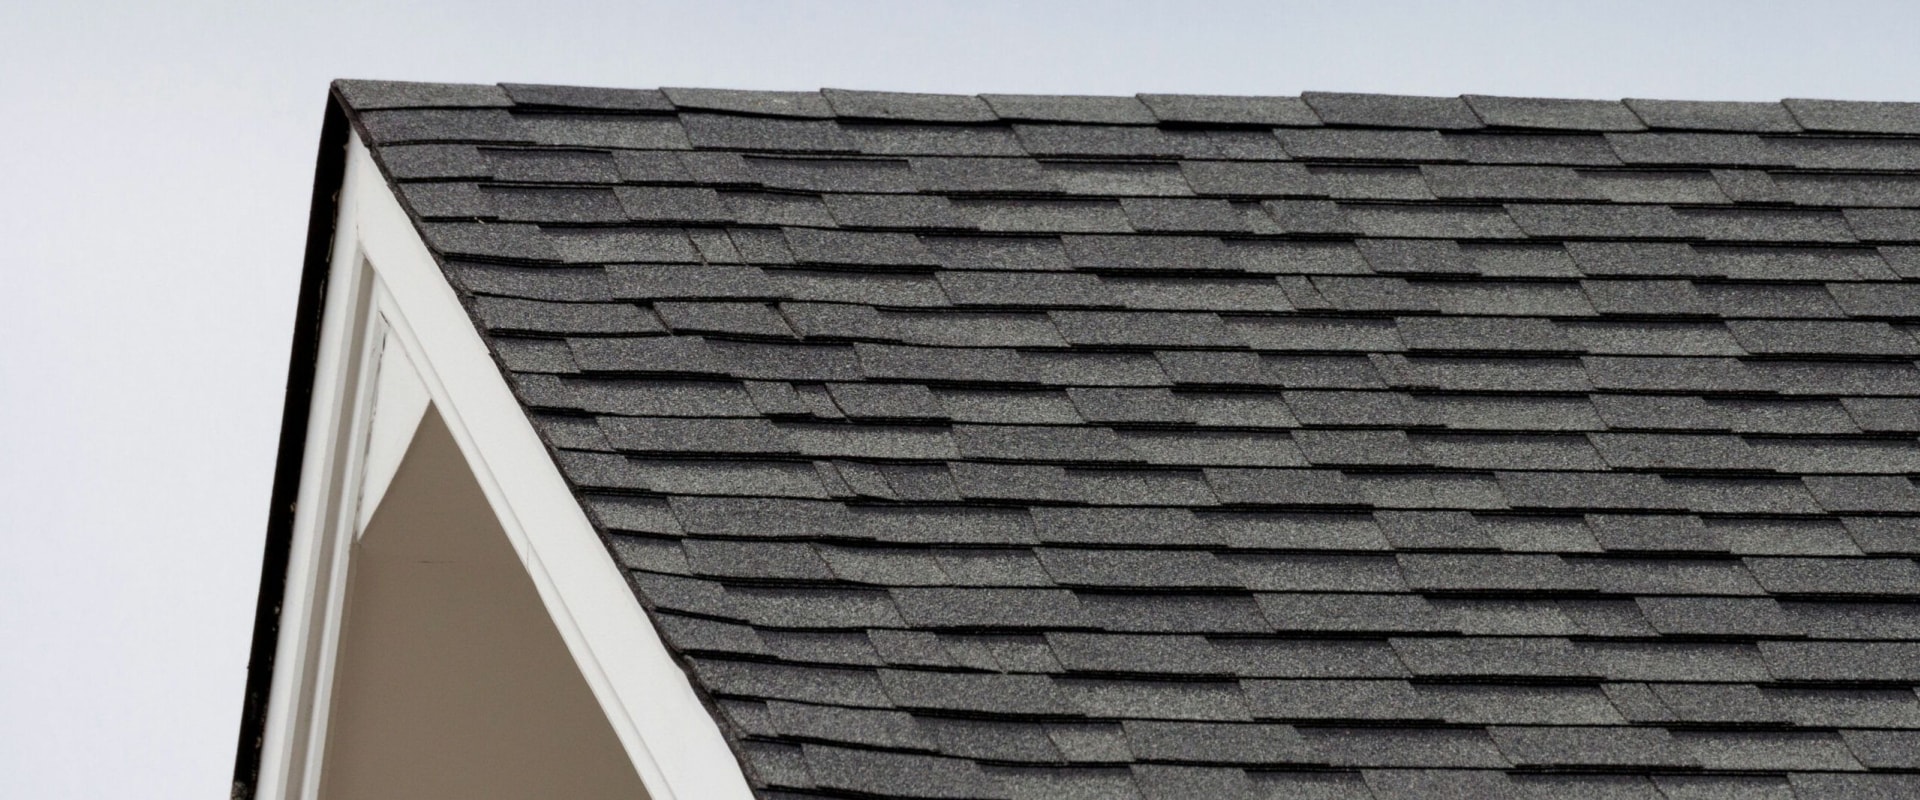 Installing Residential Roofs: A Comprehensive Overview